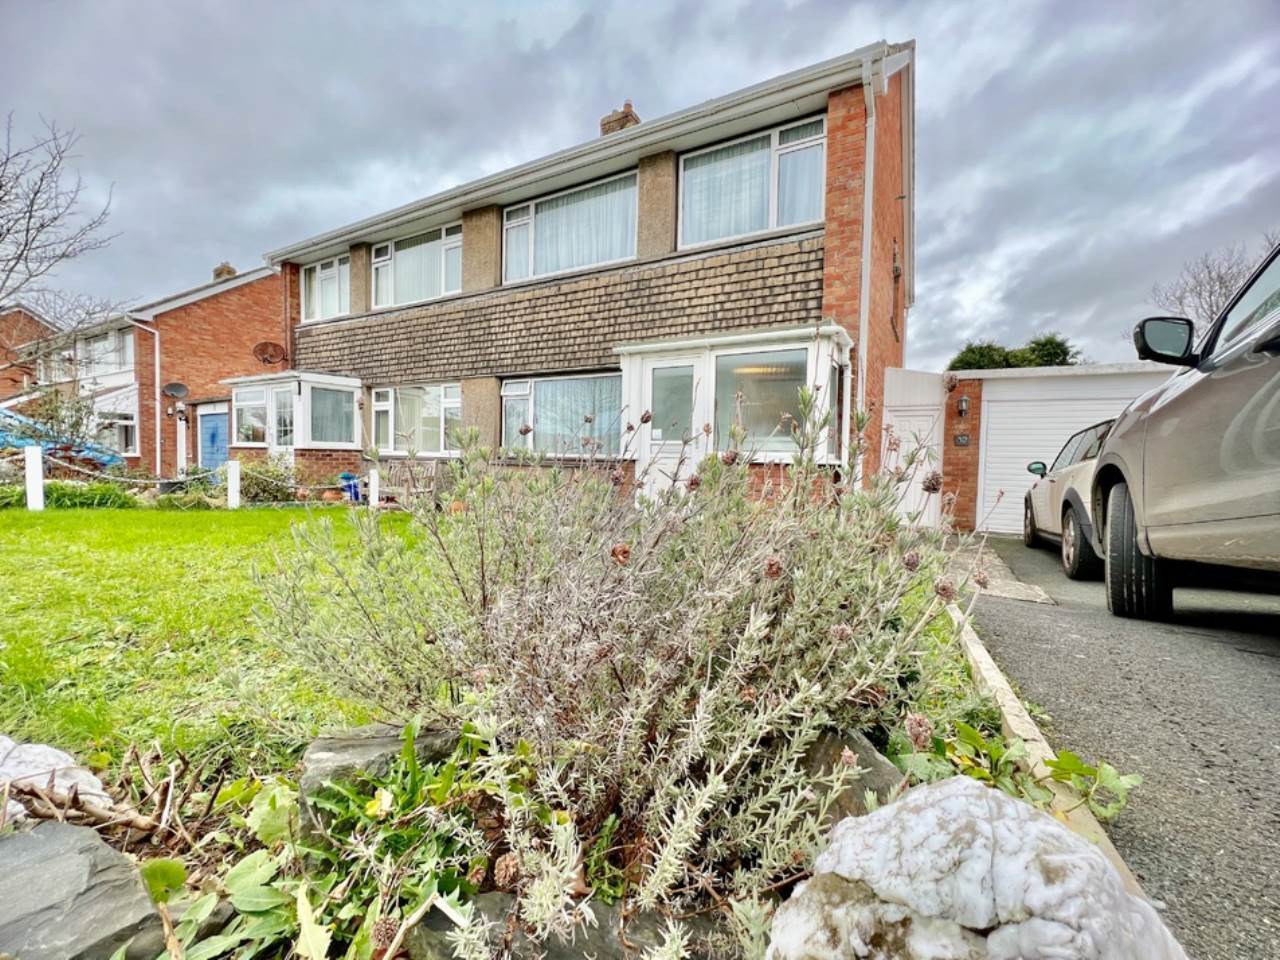 3 bed house for sale in Erw Goch, Waunfawr - Property Image 1